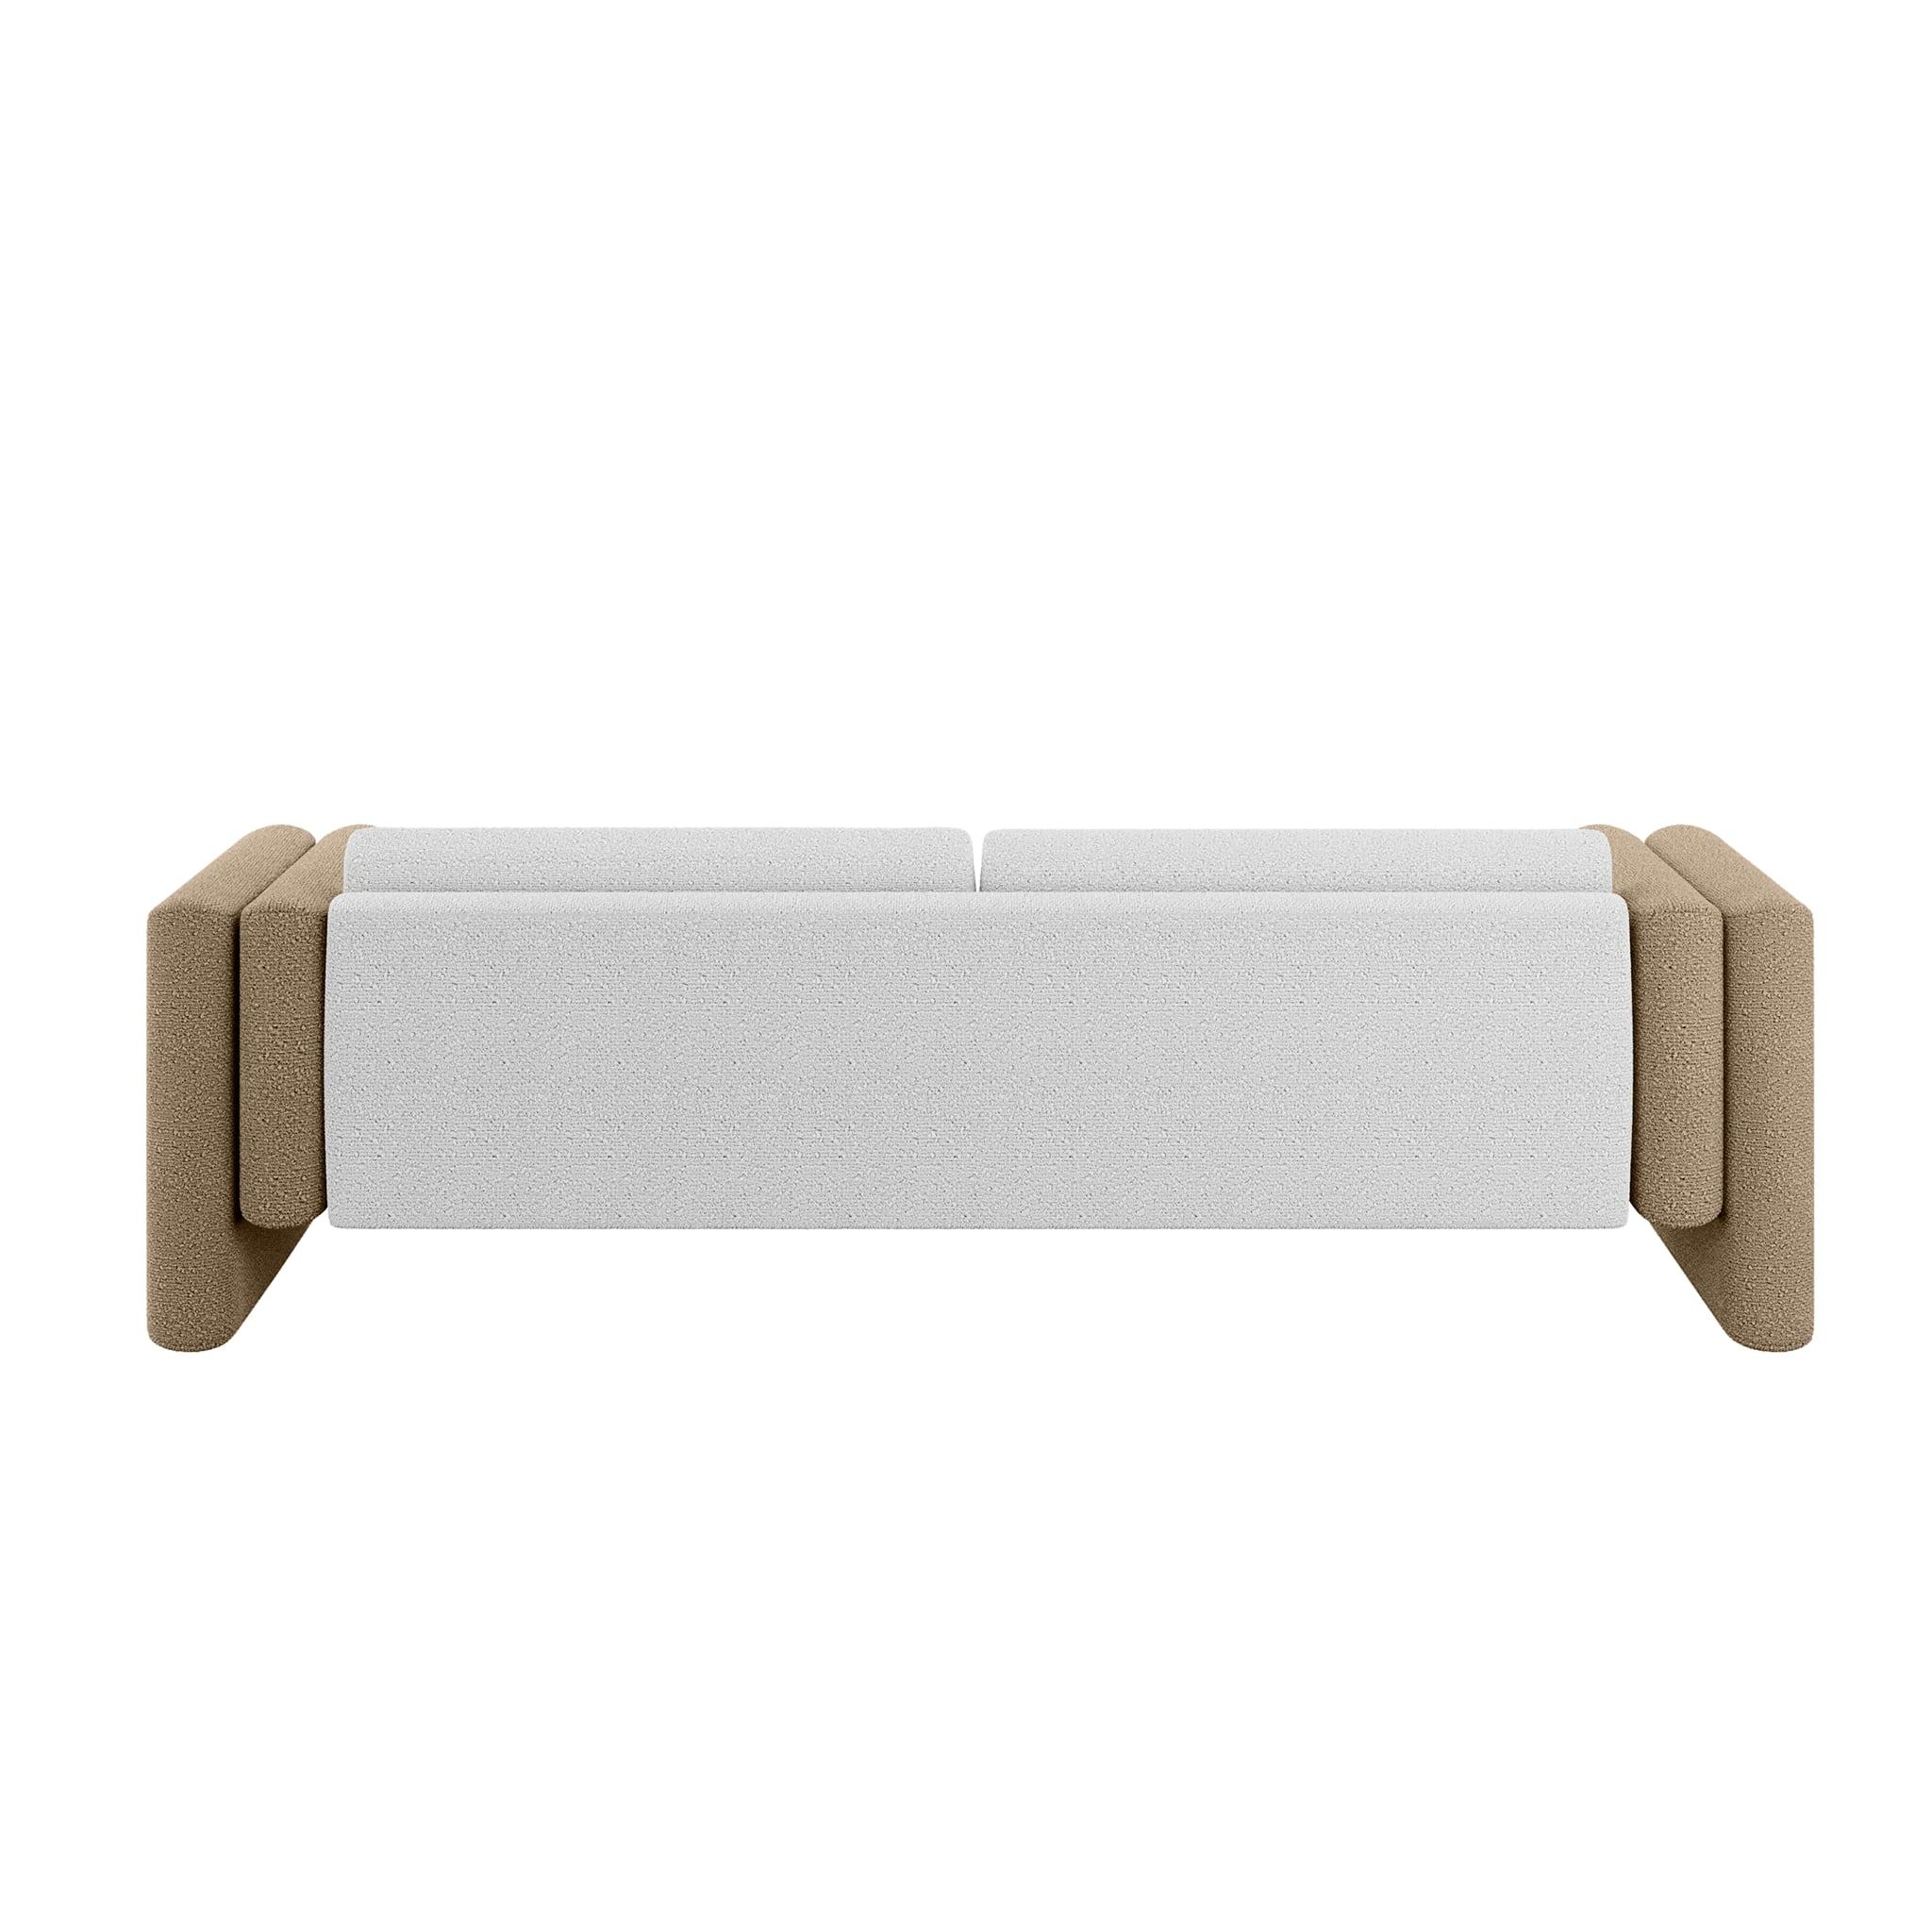 Contemporary Indoor Outdoor Sofa in Beige, Khaki & White Outdoor Fabric For Sale 1